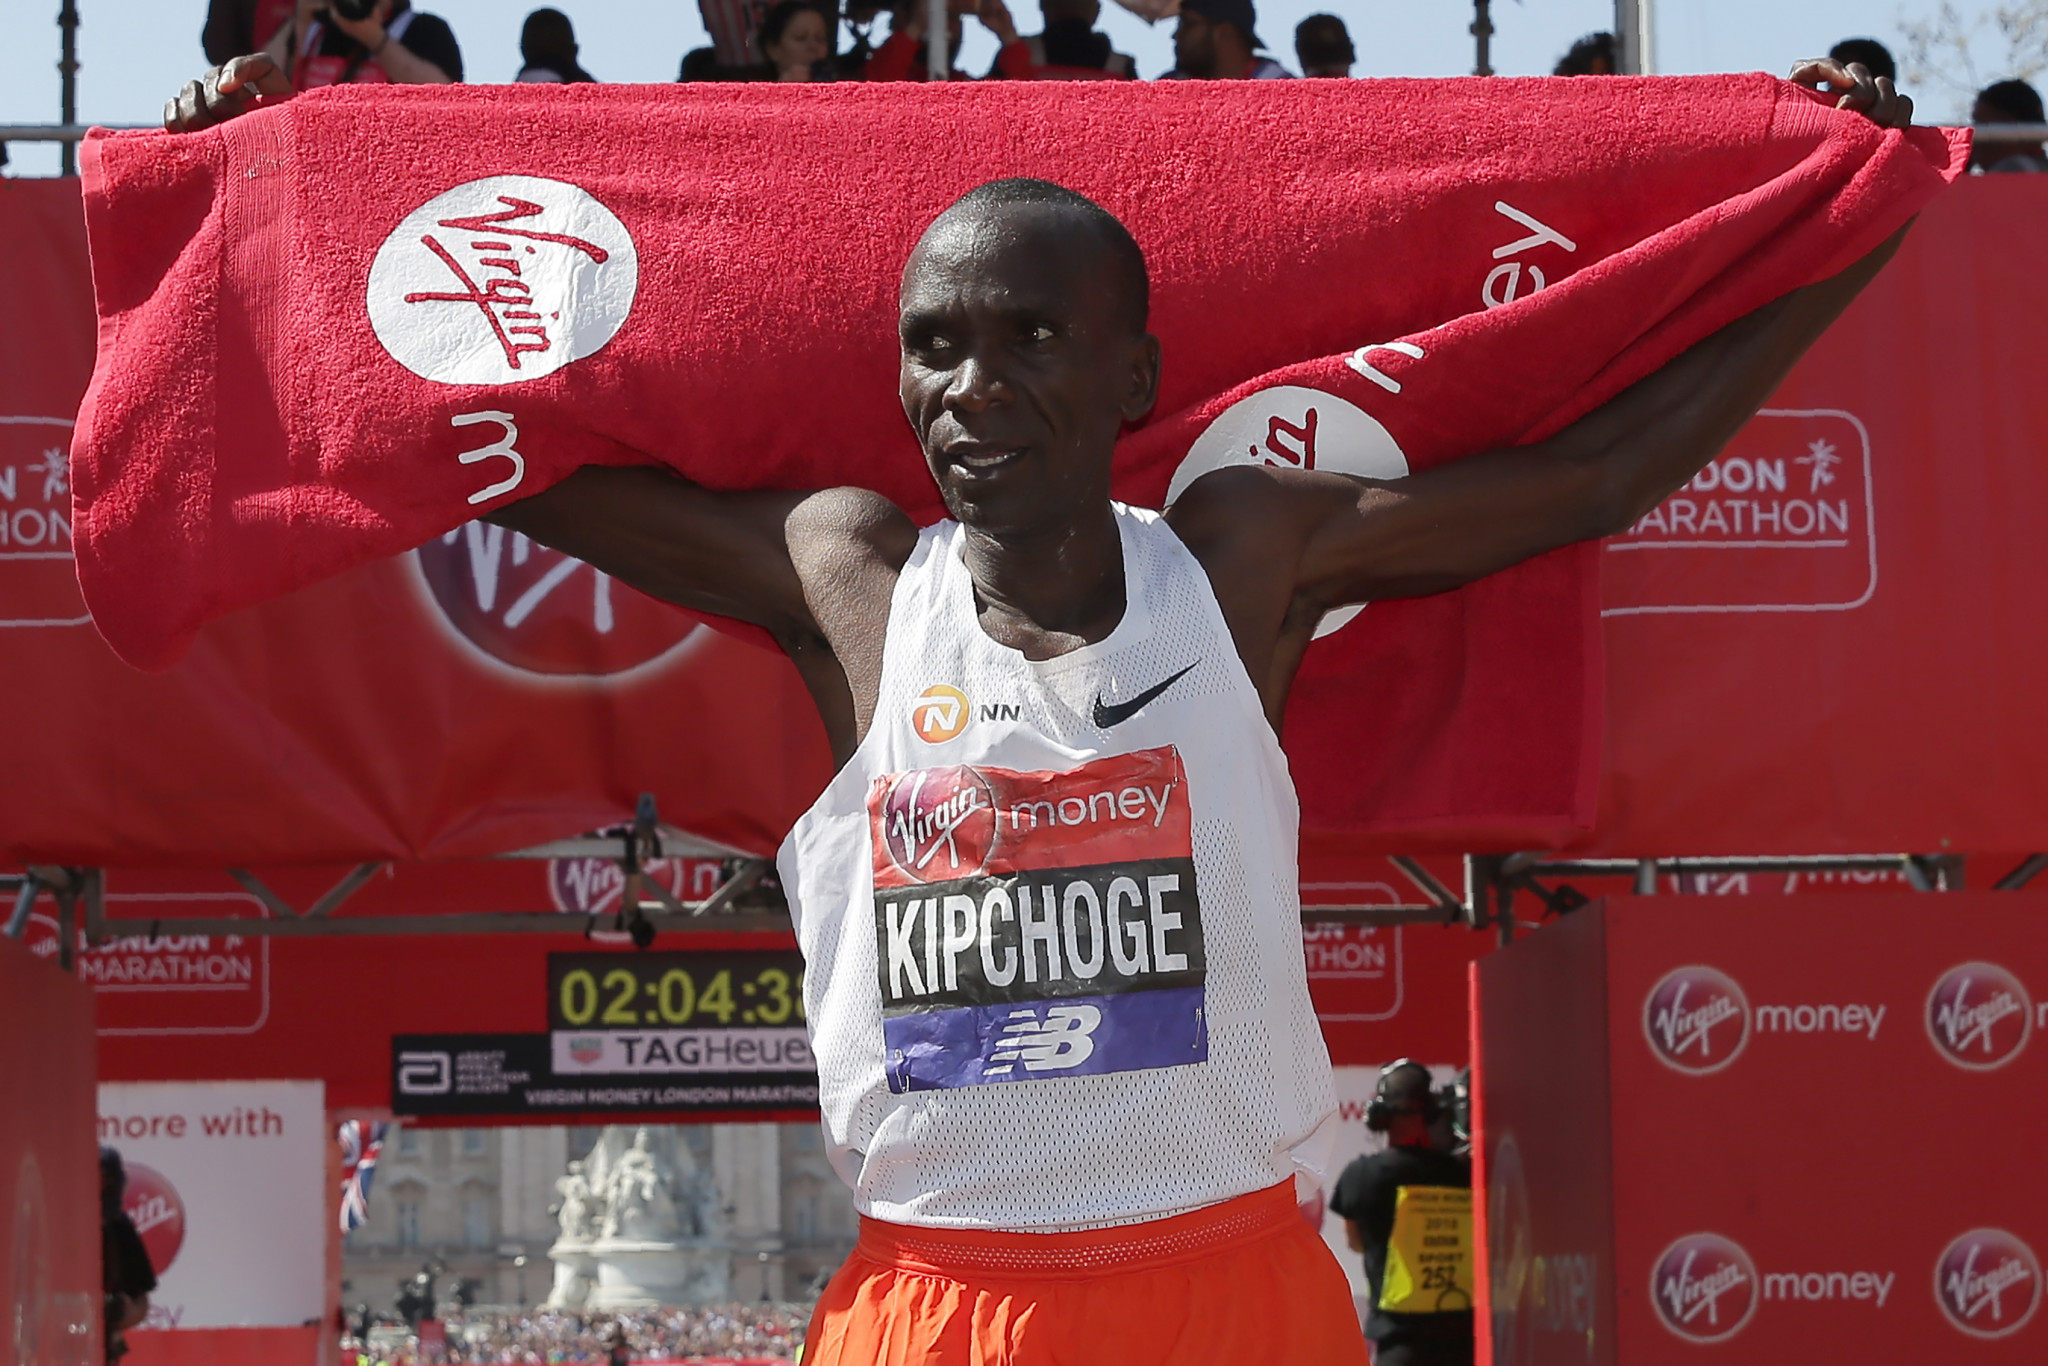 Eliud Kipchoge dominated from start to finish to claim his third London Marathon triumph ©Getty Images